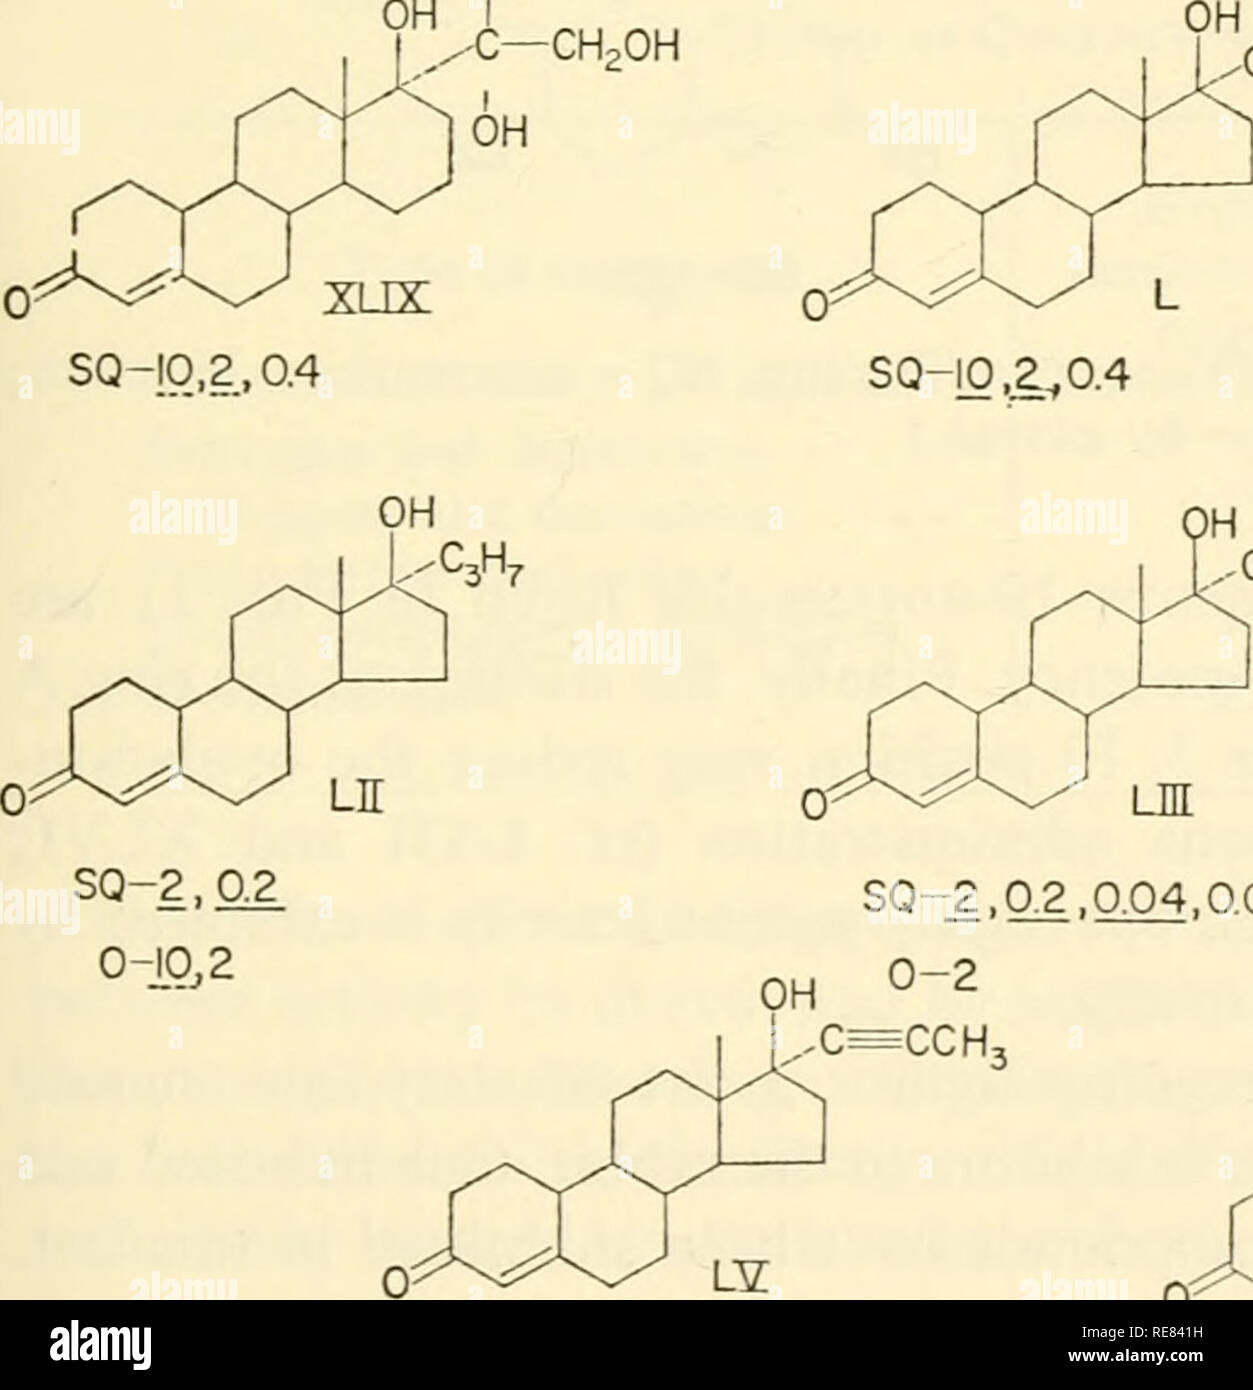 . Control of ovulation; proceedings of the conference held at Endicott House, Dedham, Massachusetts, 1960. Ovulation -- Regulation. XLvni 5Q-I0 Fig. 9. 17a-Methyl, ethyl and ethinyl derivatives of 19-nortestosterone. (Dosage in milli- grams. SQ = subcutaneous injection; O = by gavage.) OH ,/C—CH2OH OH Q^f^-^i^-^.^ XLIX SQ-IO.2,0.4. CH2CH2OH CH2CH2^Cn2 ^-CH2CH2 CH CHj LH SQ-2.0.2.0.04,0.008. Please note that these images are extracted from scanned page images that may have been digitally enhanced for readability - coloration and appearance of these illustrations may not perfectly resemble the o Stock Photo